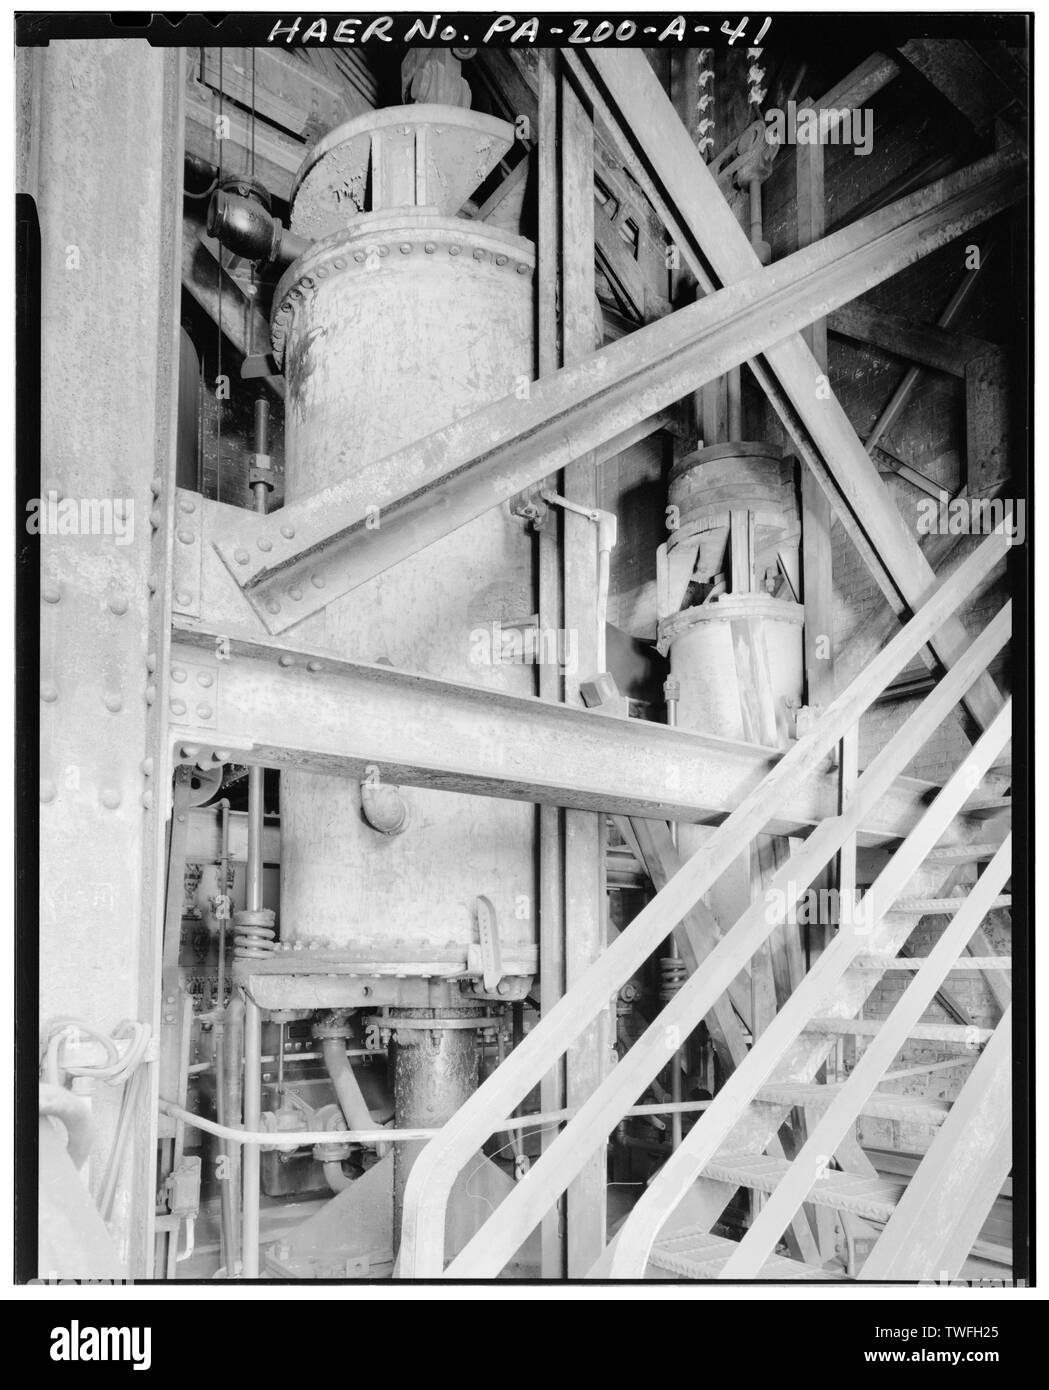 PNEUMATIC CYLINDERS THAT RAISED AND LOWERED THE SMALL AND LARGE BELLS WITHIN THE ROTARY DISTRIBUTER OF CARRIE FURNACE No. 6. - U.S. Steel Homestead Works, Blast Furnace Plant, Along Monongahela River, Homestead, Allegheny County, PA; U.S. Steel Corporation; Brown, James S; Clark, E L; Fownes, H C; Fownes, W C; Brown Hoisting Machinery Company; Massicks and Crooke; Pollock Company; Westinghouse Electric Company; Wilson-Snyder; Allis-Chalmers Company; Keystone Bridge Company; Riley-Stoker; Ingersoll-Rand; S. P. Kinney; Research-Cottrell, Incorporated; Worthington [pump manufacturer]; American Br Stock Photo